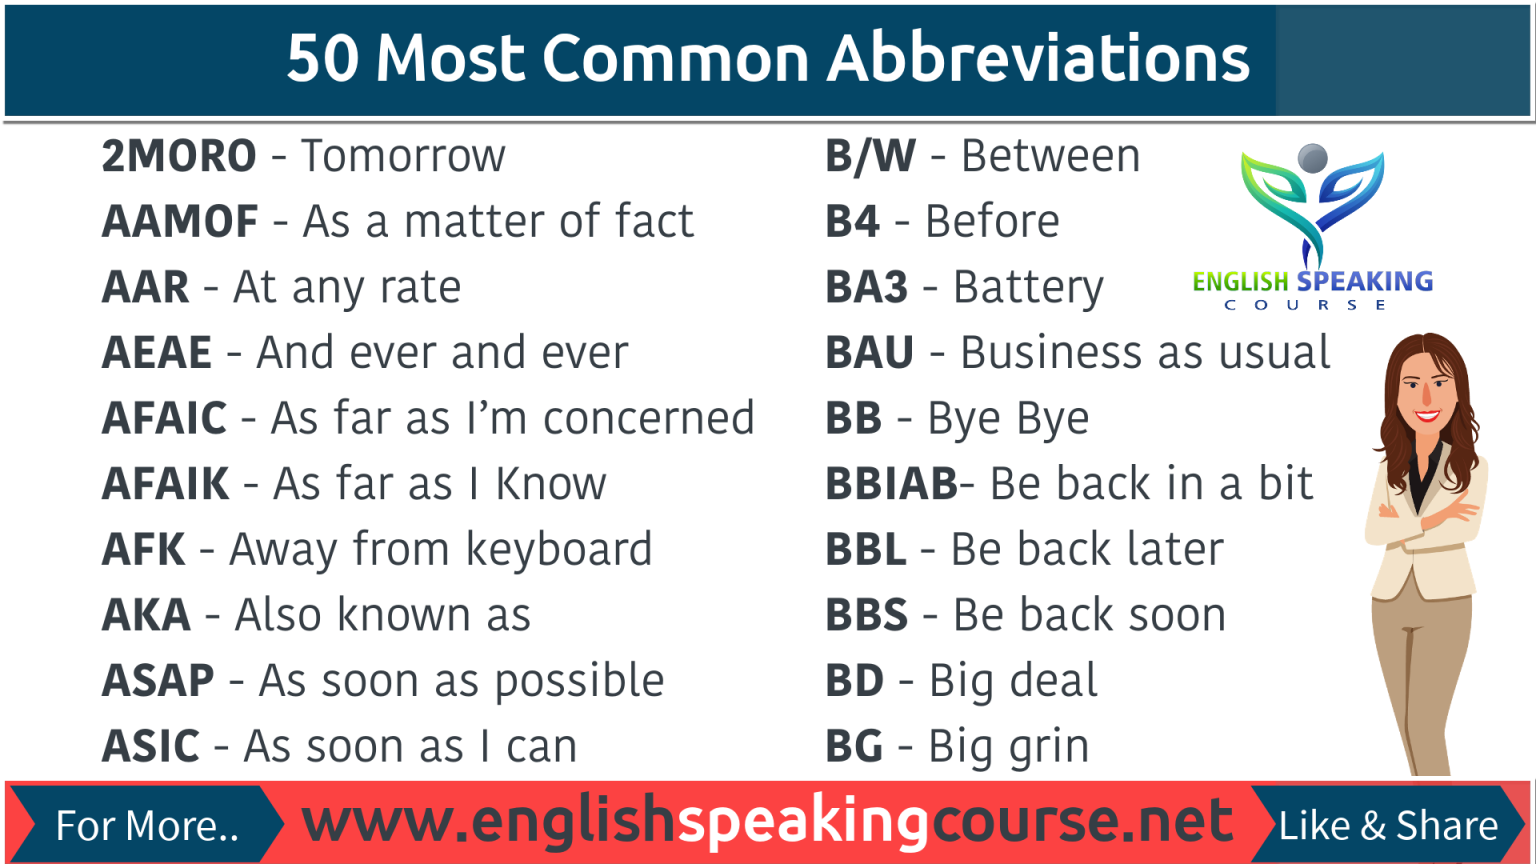 texting abbreviations for words